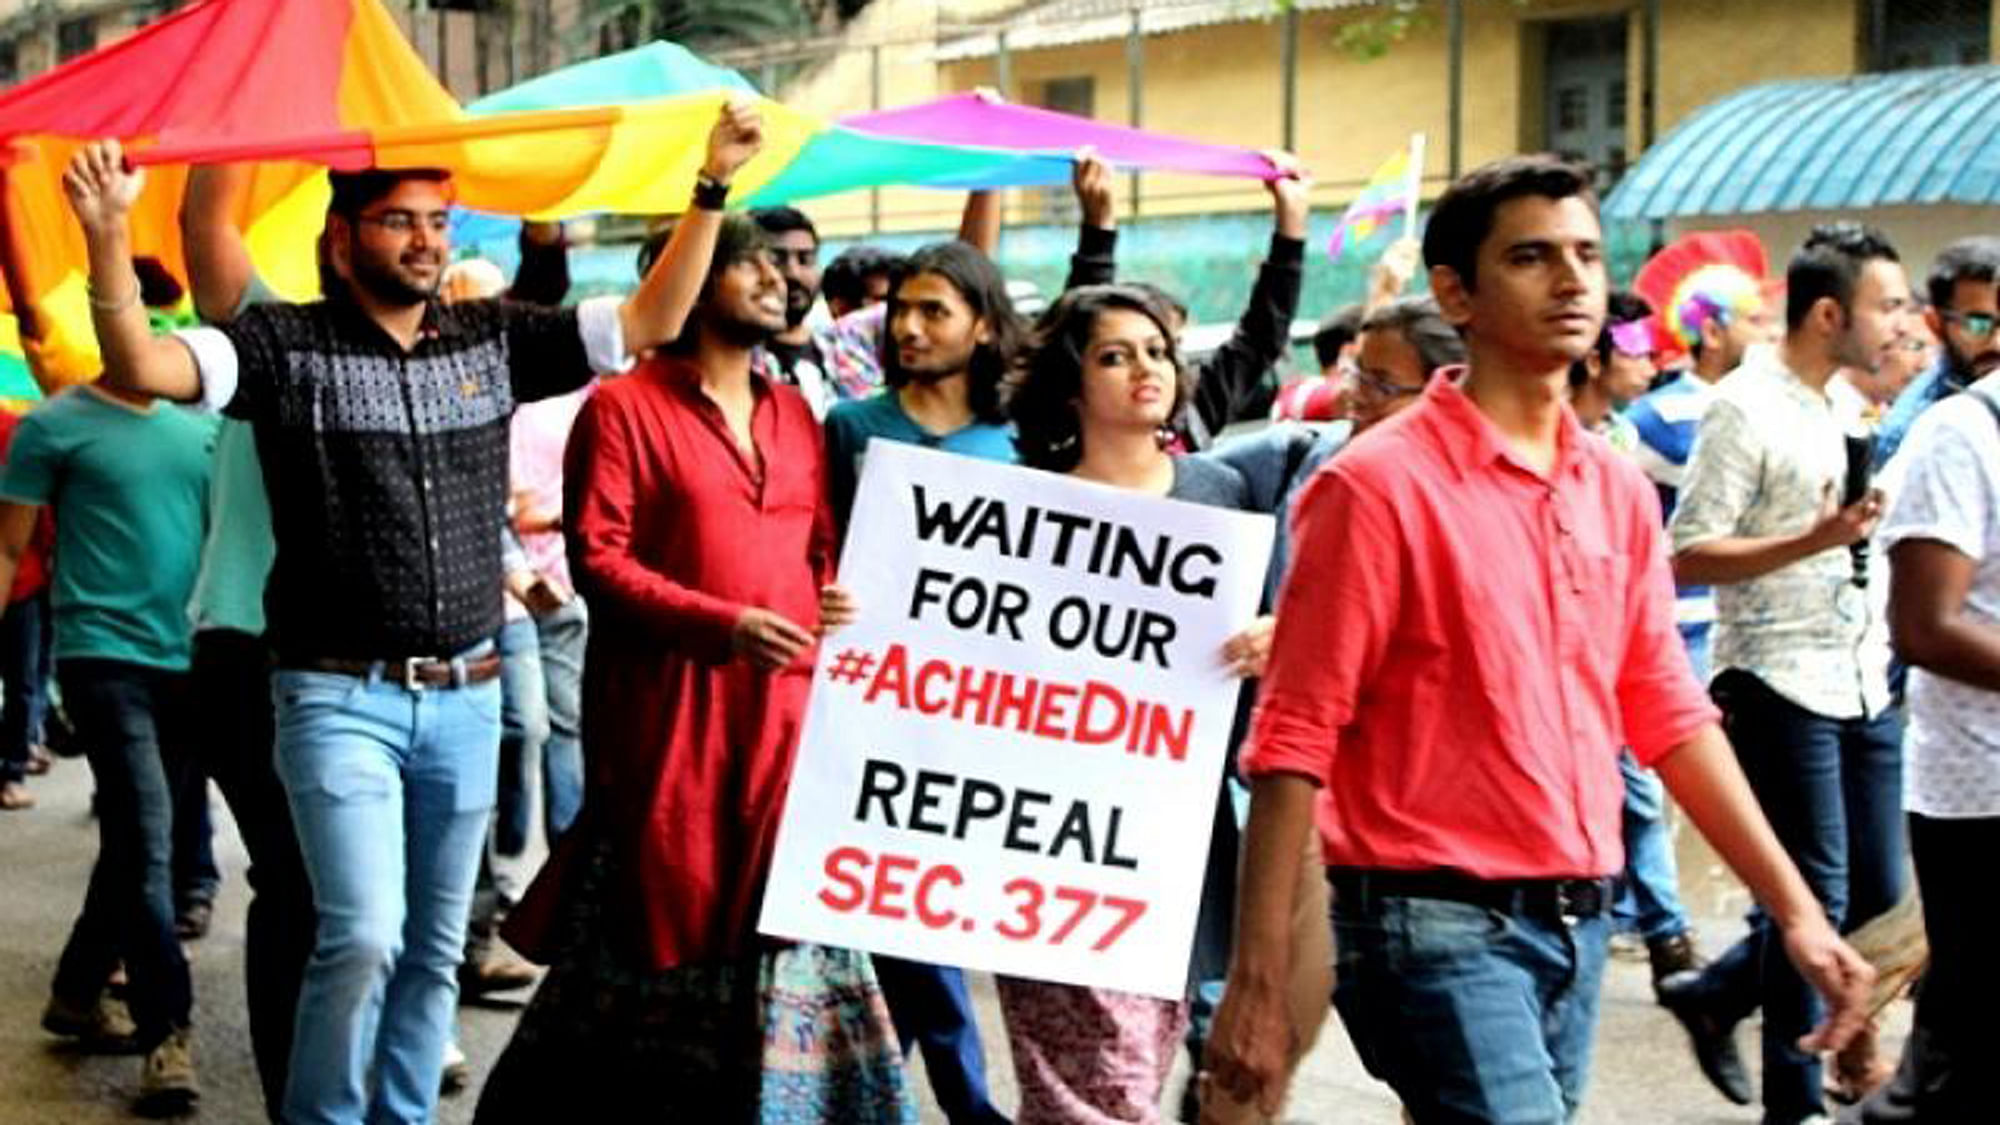 Section 377 of the Indian Penal Code which criminalises homosexuality will be <a href="https://www.bloombergquint.com/law-and-policy/2018/01/08/section-377-will-be-repealed-sooner-than-later-says-top-gay-rights-lawyer">repealed</a> ‘sooner than later’, said Anand Grover.